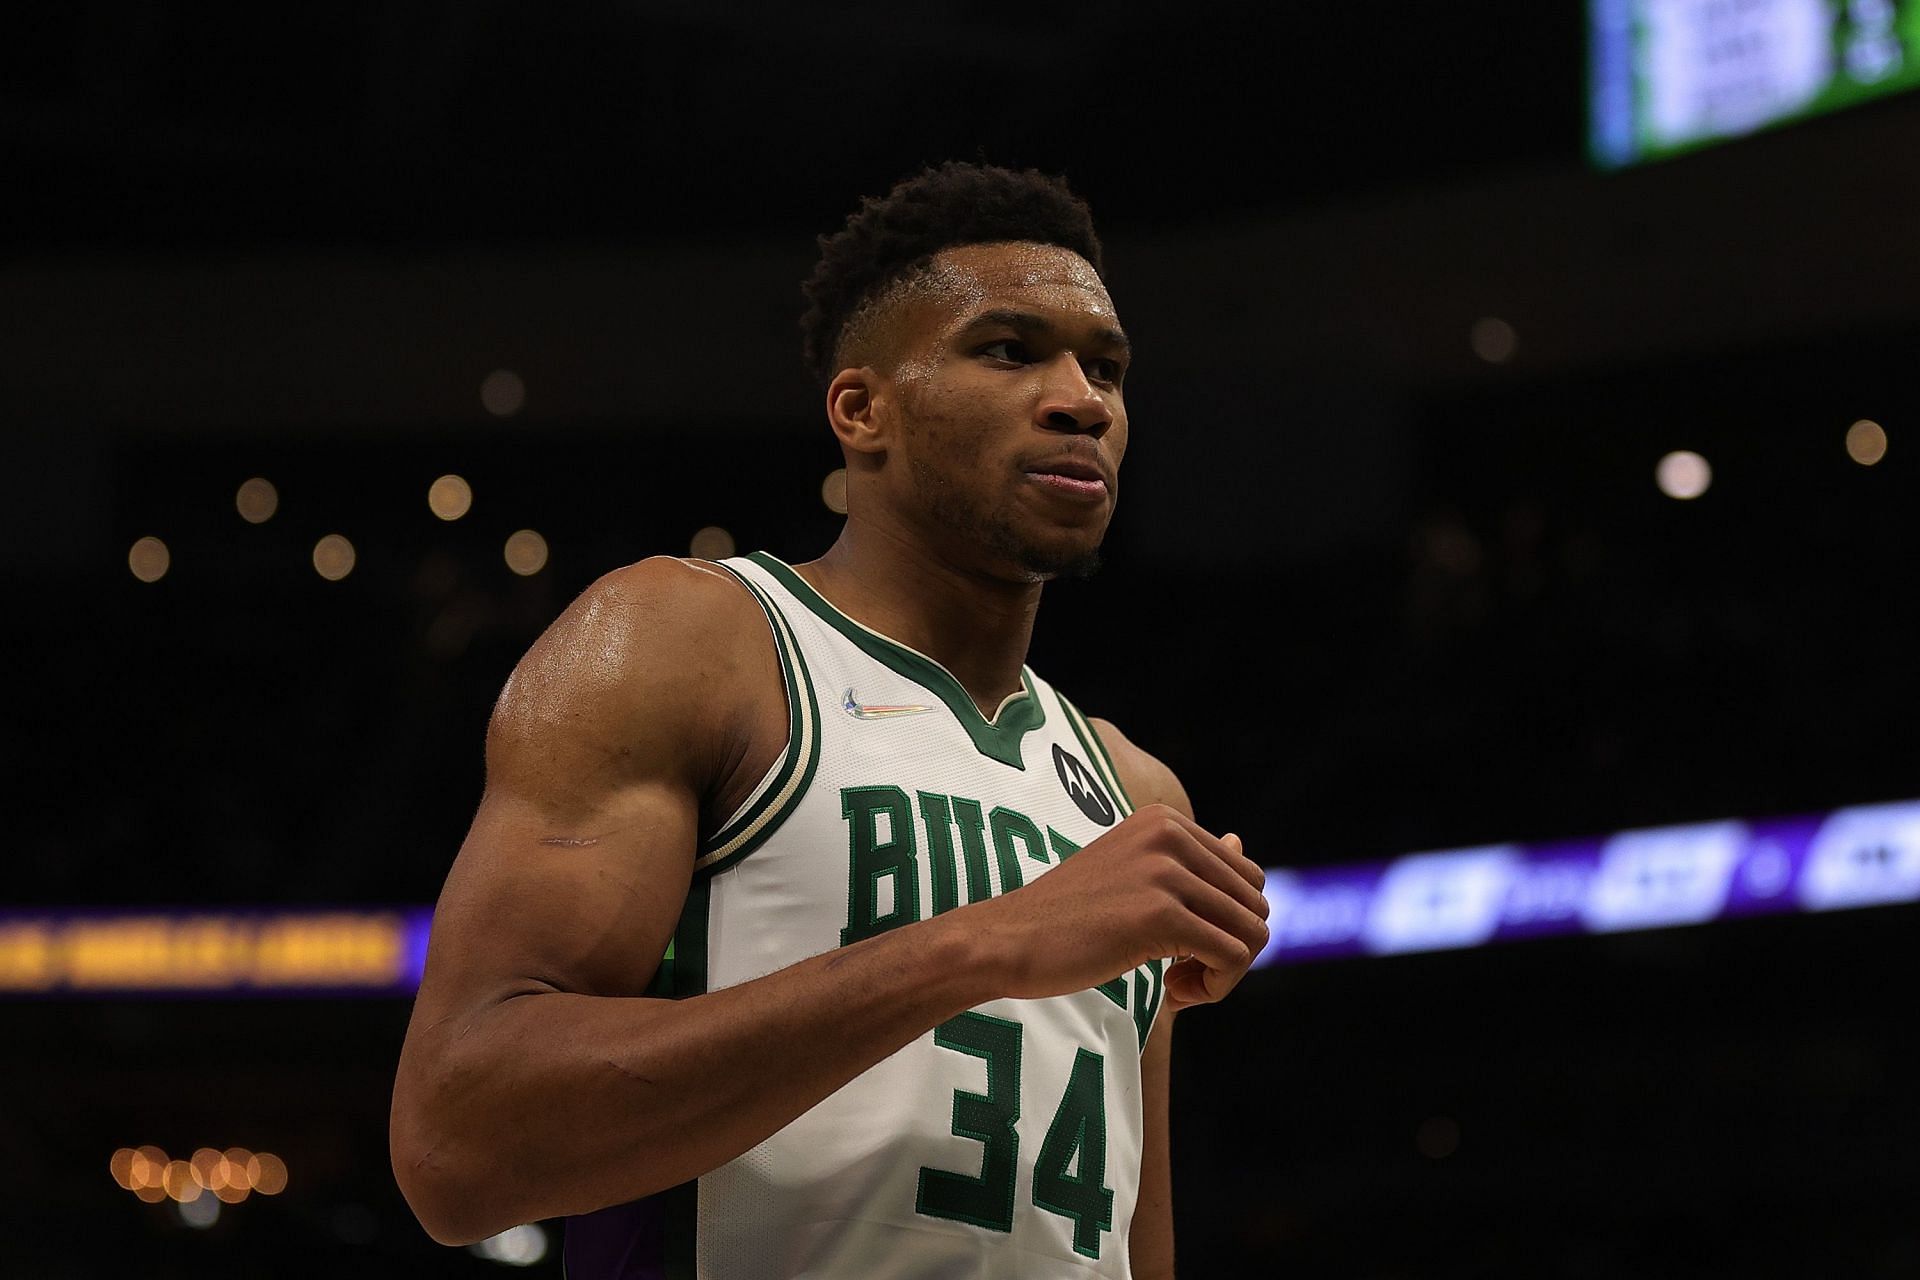 Giannis Antetokounmpo had a double-double for Milwaukee Bucks in their win against the Denver Nuggets